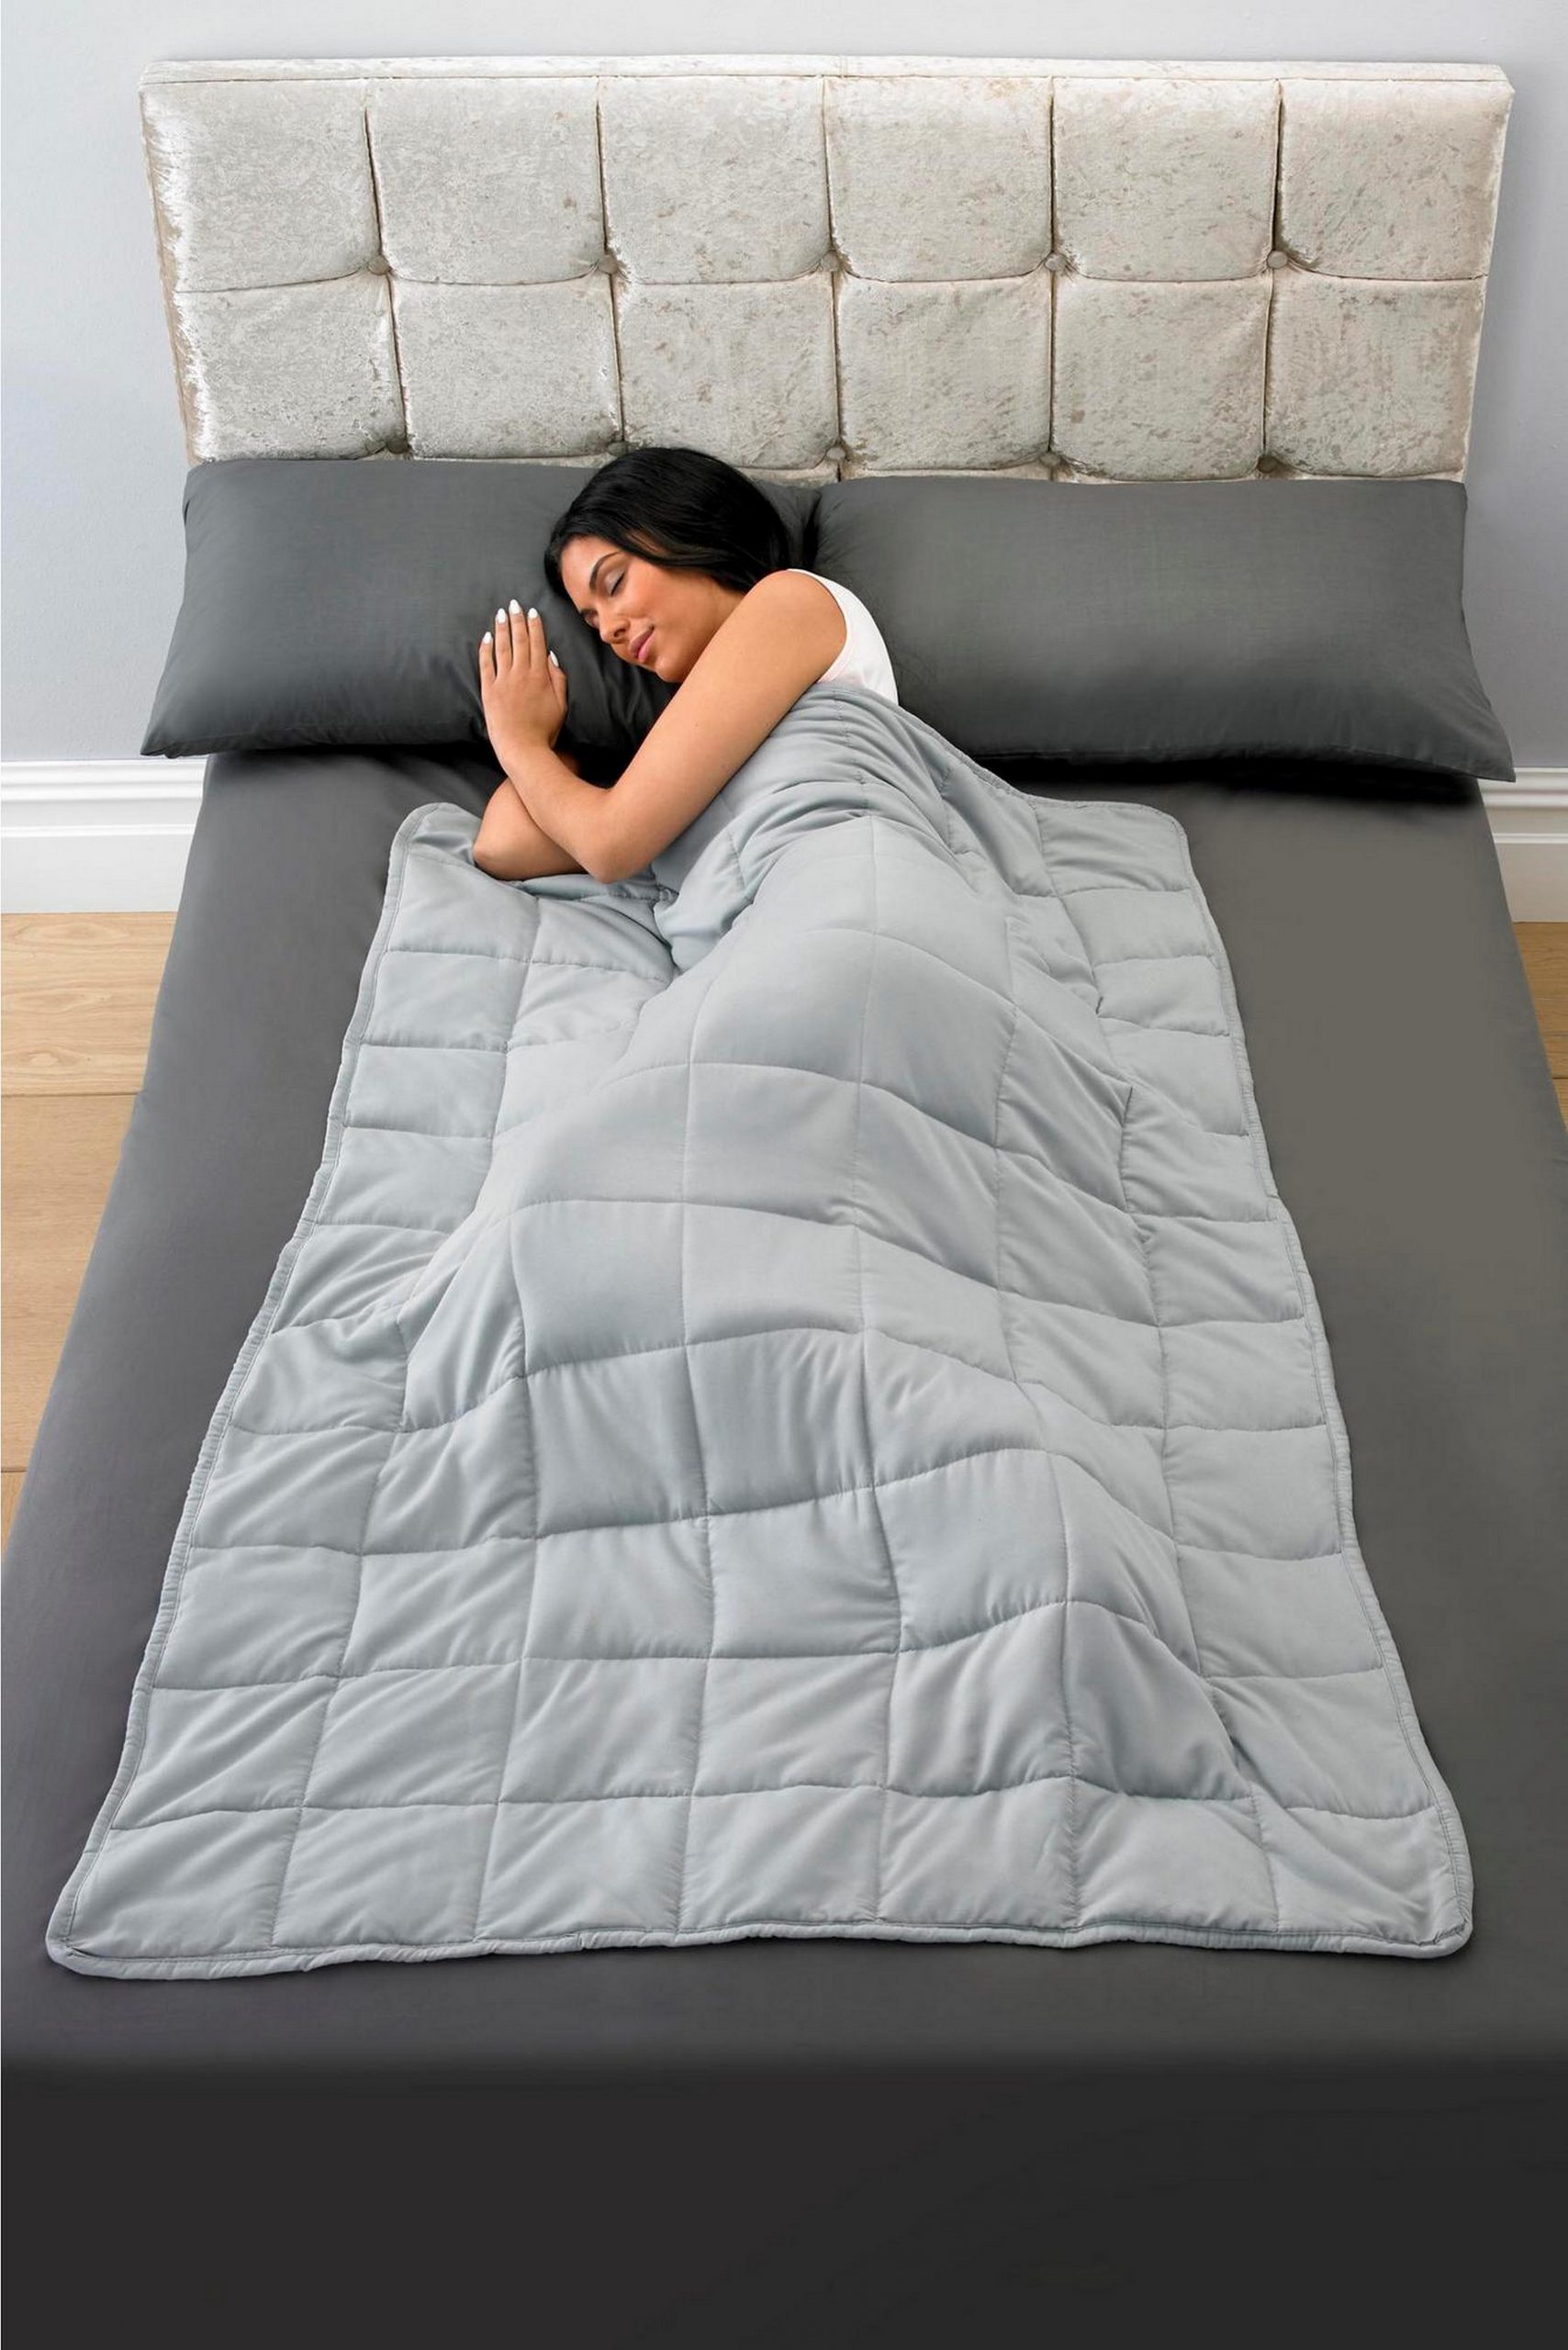 Weighted blanket aids sleep and reduces anxiety